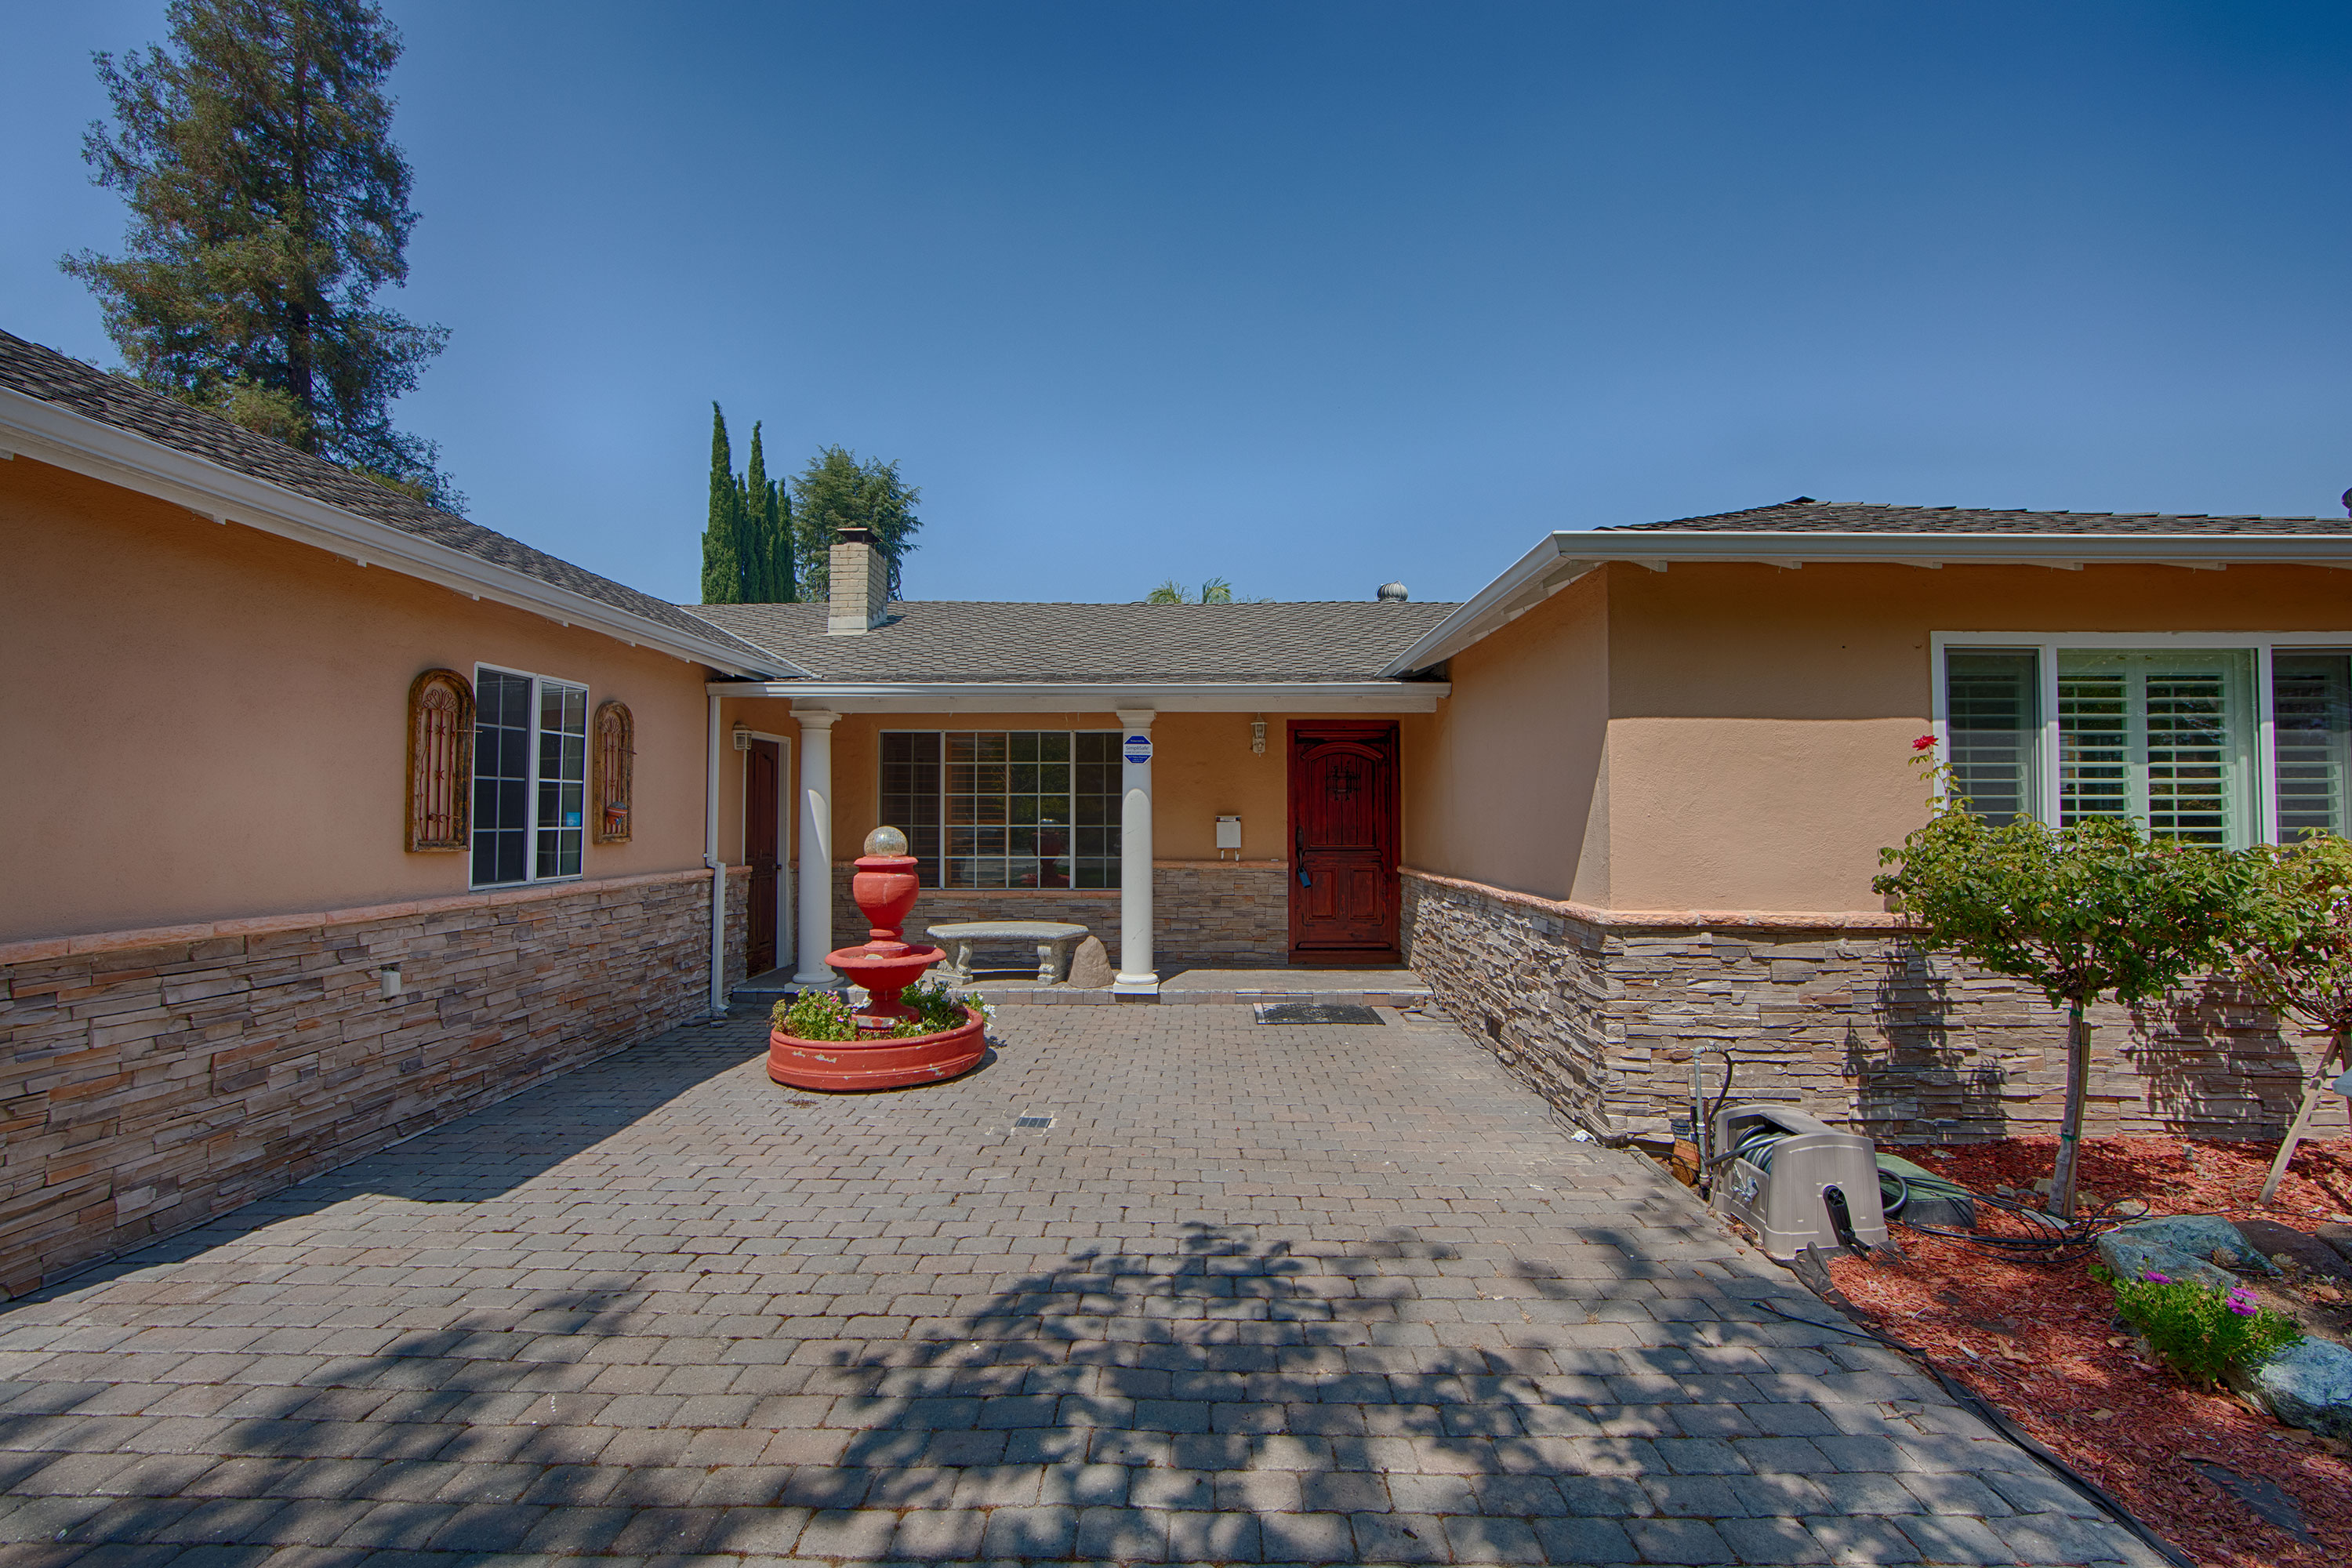 20599 Scofield Dr, Cupertino 95014 - Front Court Yard (A)